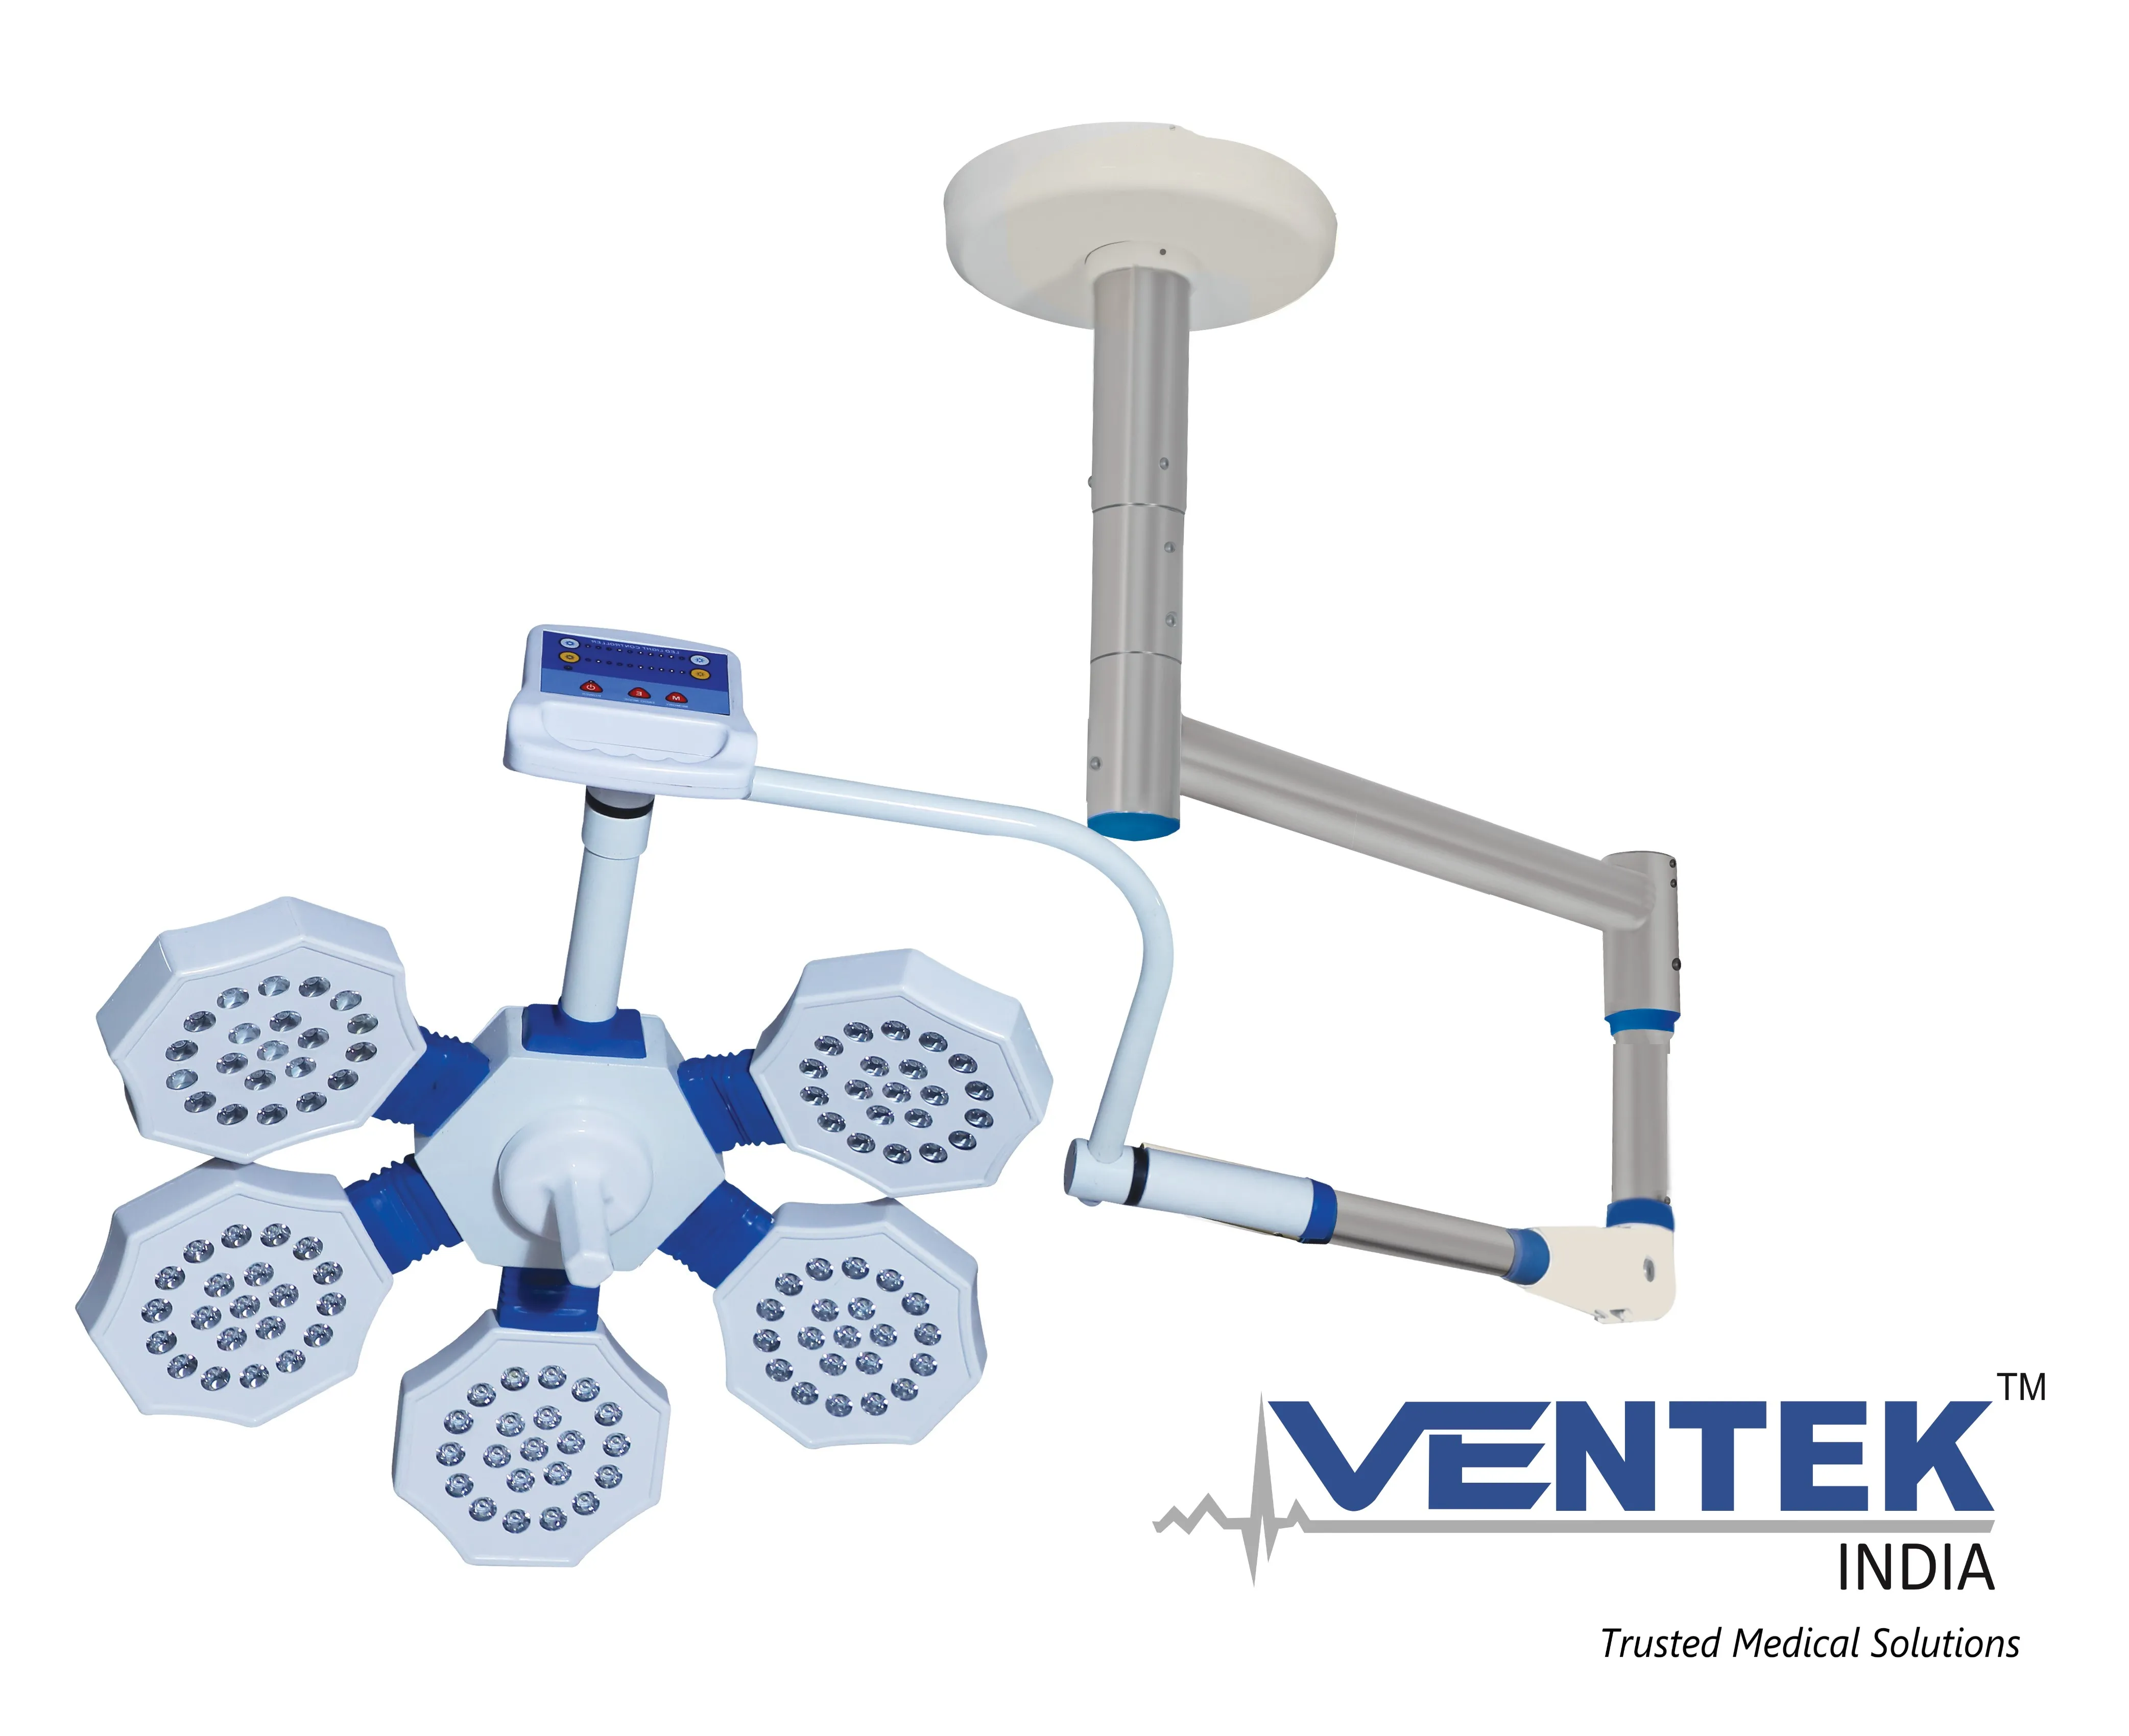 Star 105 - Single Dome LED Operation Theatre Light with Ceiling Mounted Stand, Brand: Ventek India